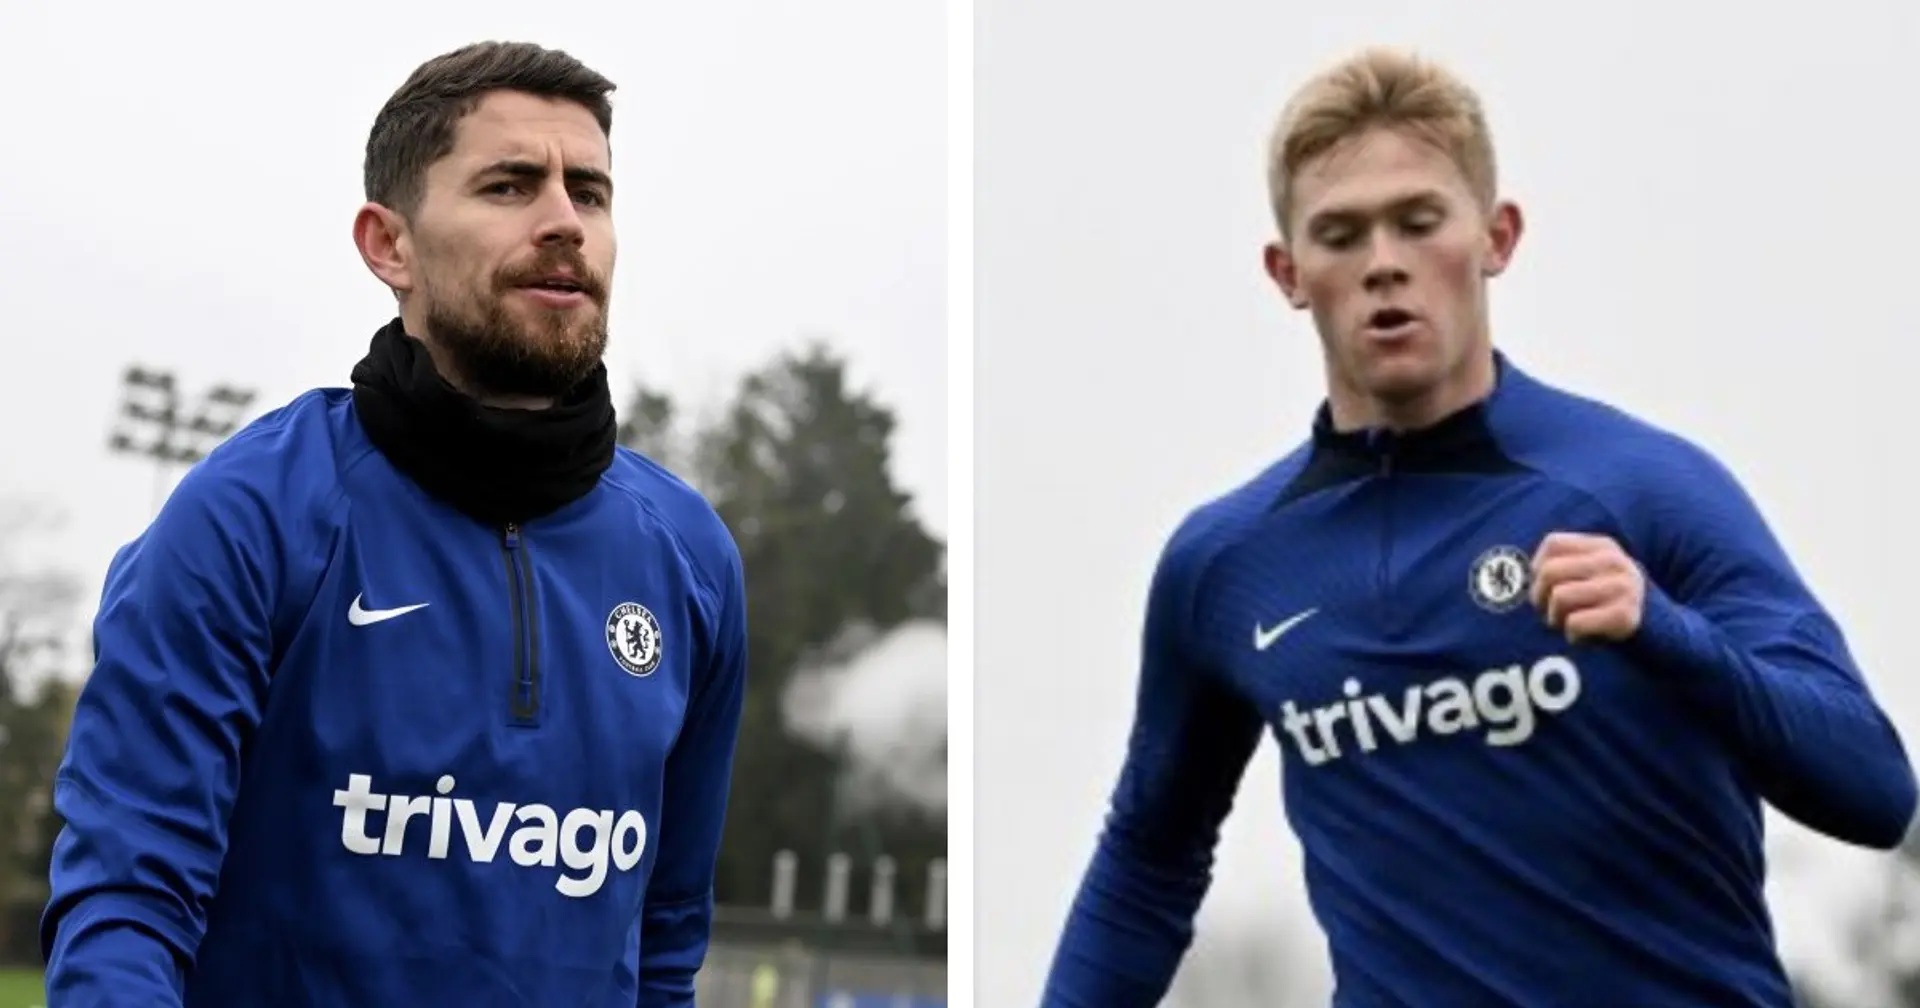 Blues are back: 6 photos from Chelsea's first training session after break